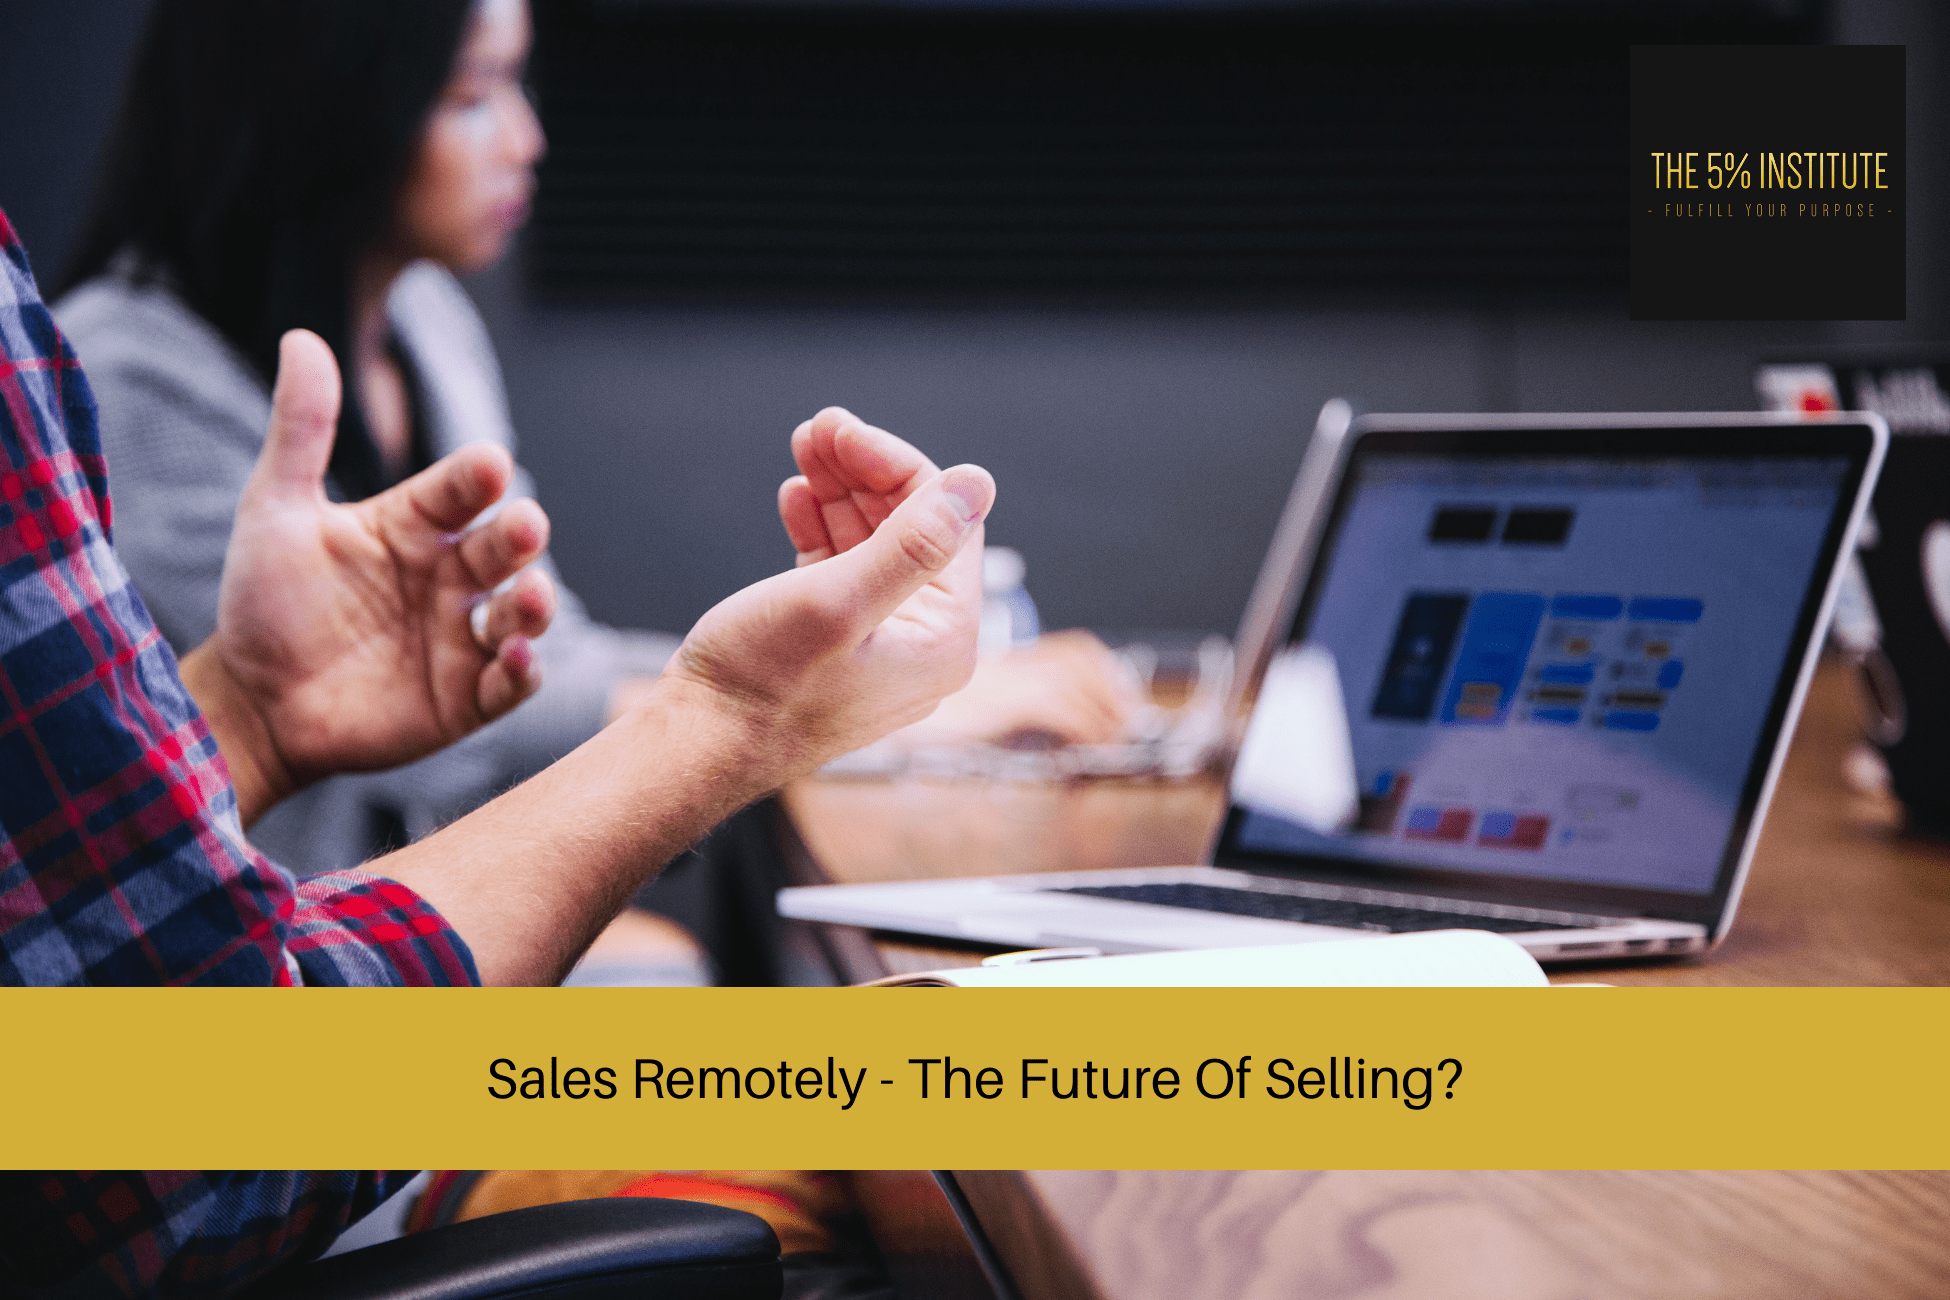 Sales Remotely - The Future Of Selling